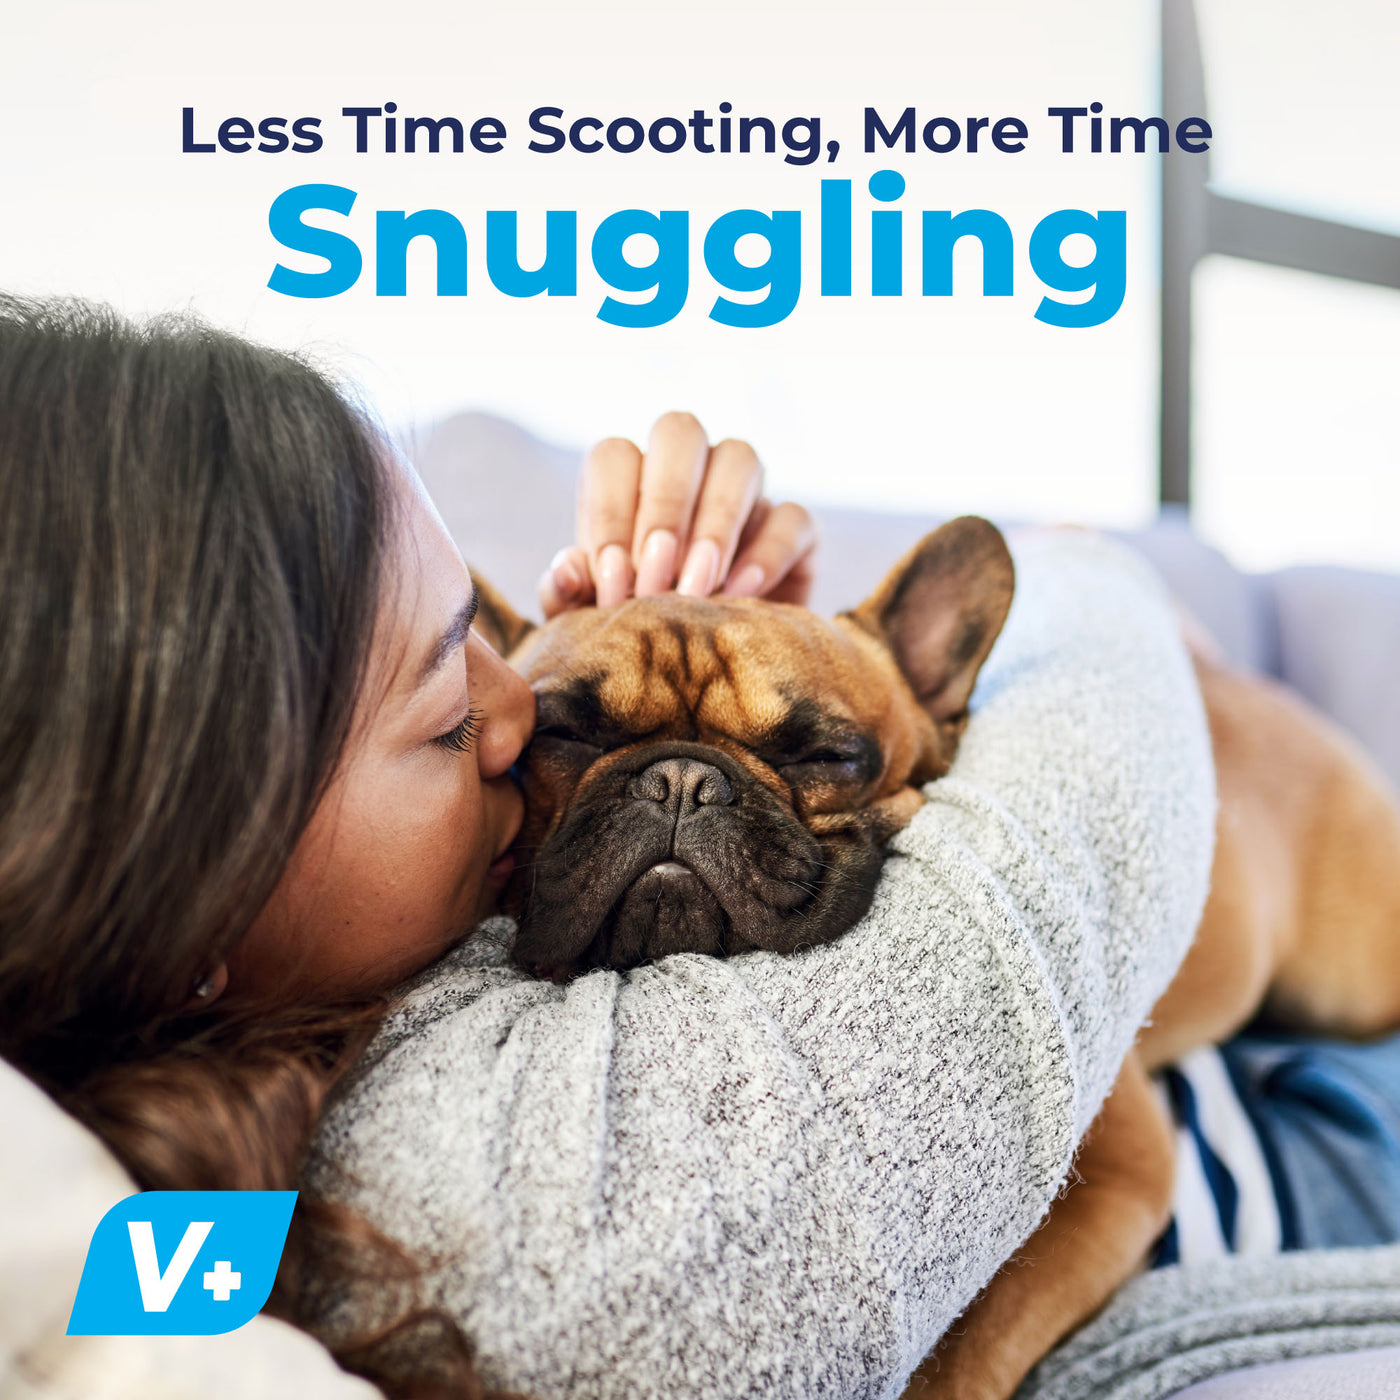 Less Time Scooting, More Time Snuggling